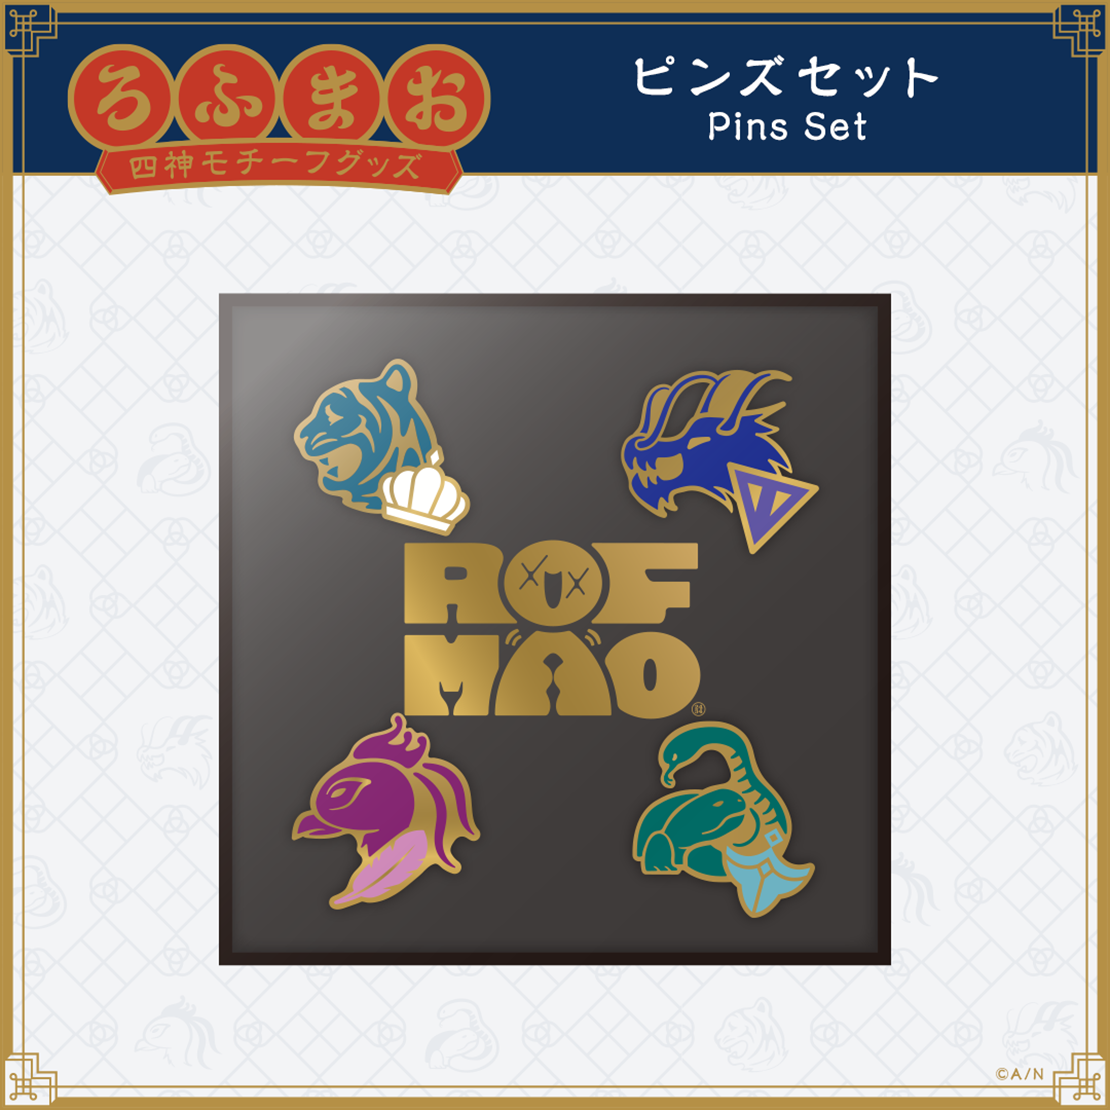 【ROF-MAO 四神モチーフグッズ】ピンズセット